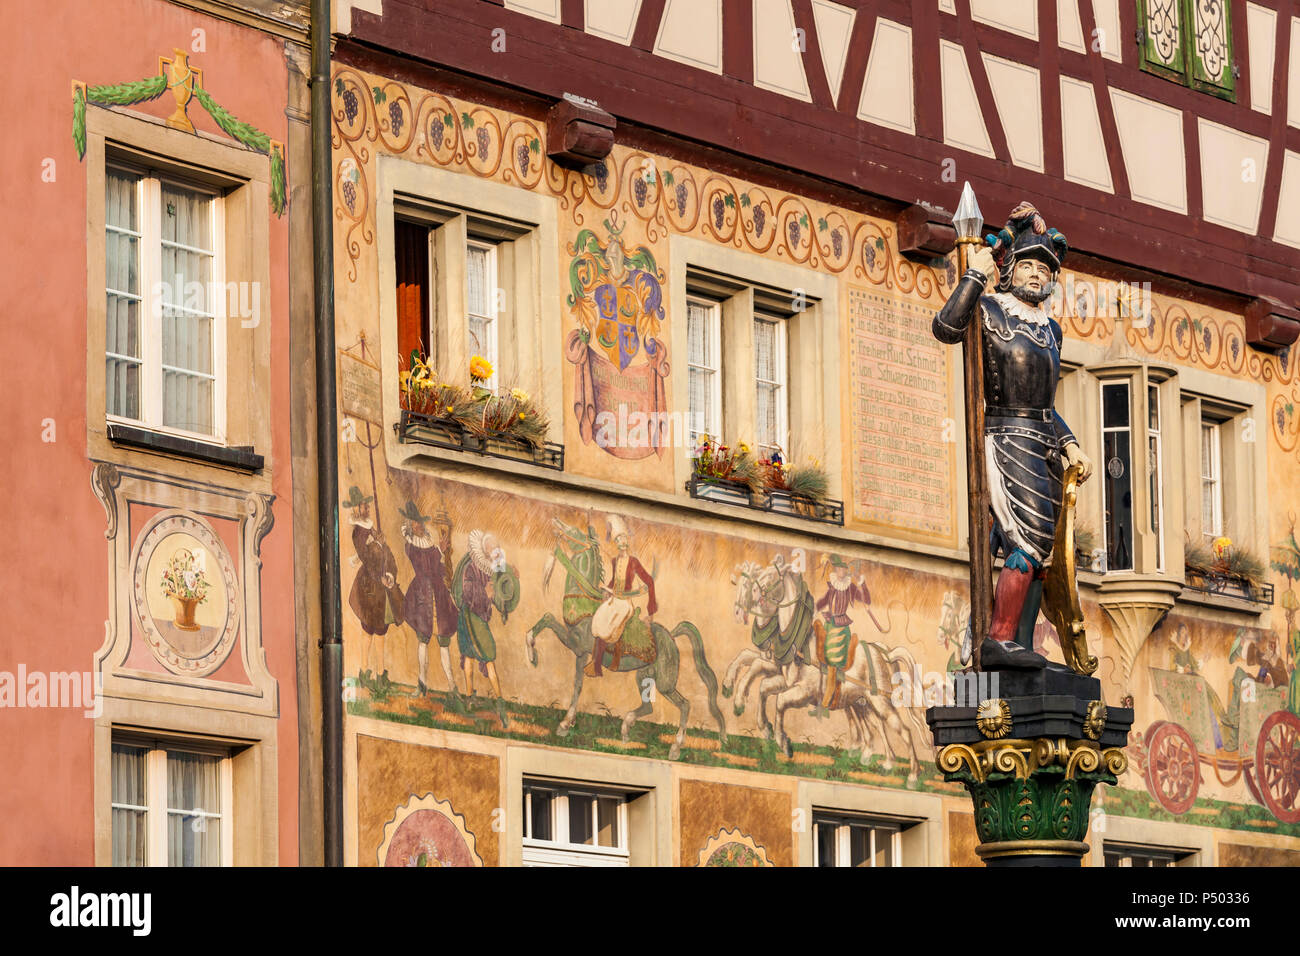 Switzerland, Stein am Rhein, Old town, historical houses at townhall square, fresco paintings, sculpture on fountain Stock Photo